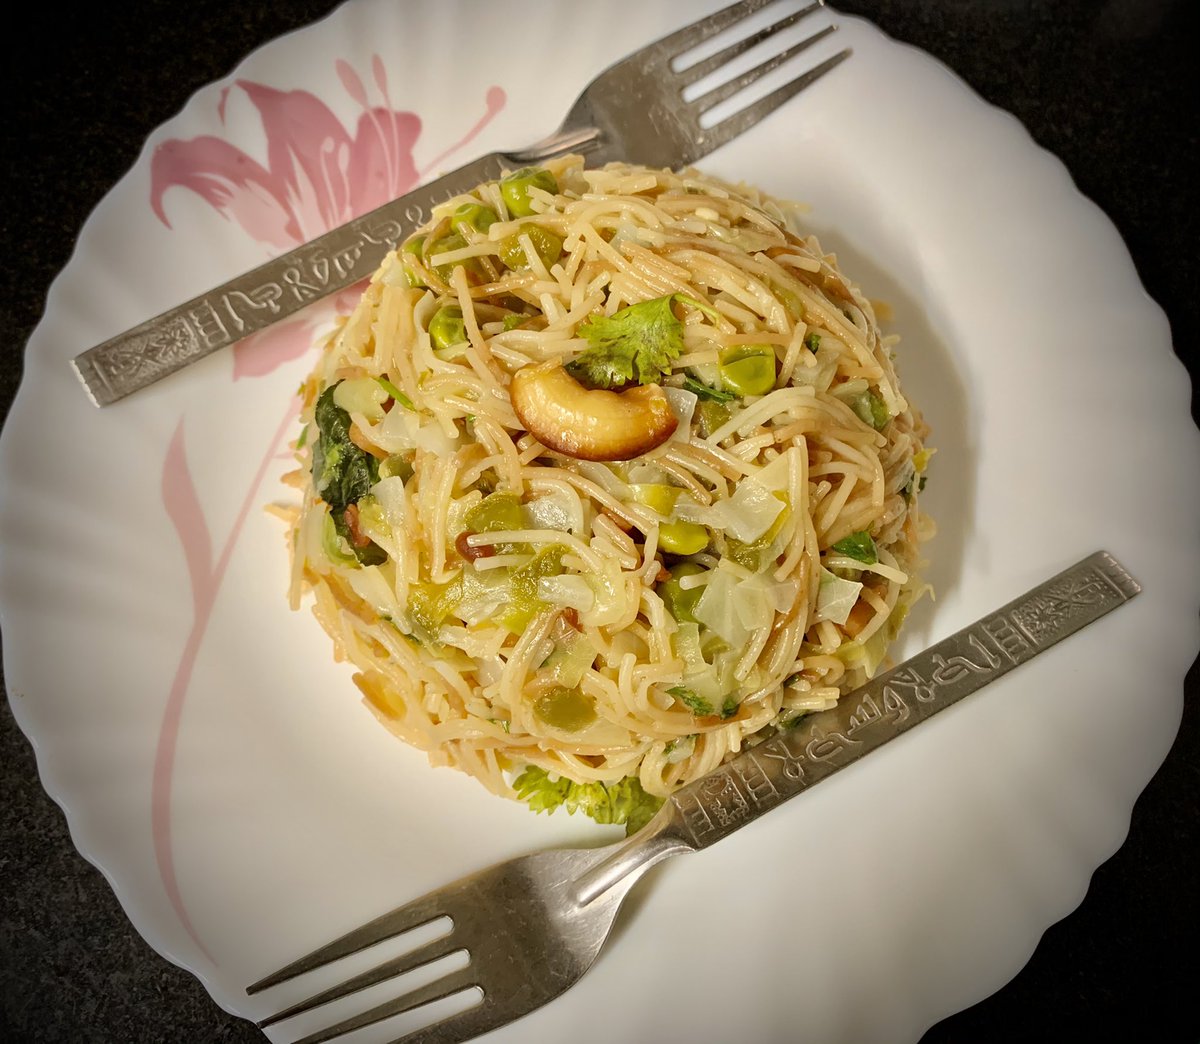 #Aaharam #JainRecipes #VermicelliUpma #SemiyaUpma #SeviyanUpma #VermicelliUpmaRecipe #Vermicelli #BreakfastRecipe

Aaharam brings you Vermicelli Upma, a popular breakfast recipe which can be made instantly
youtu.be/bWhO8CVk0cc